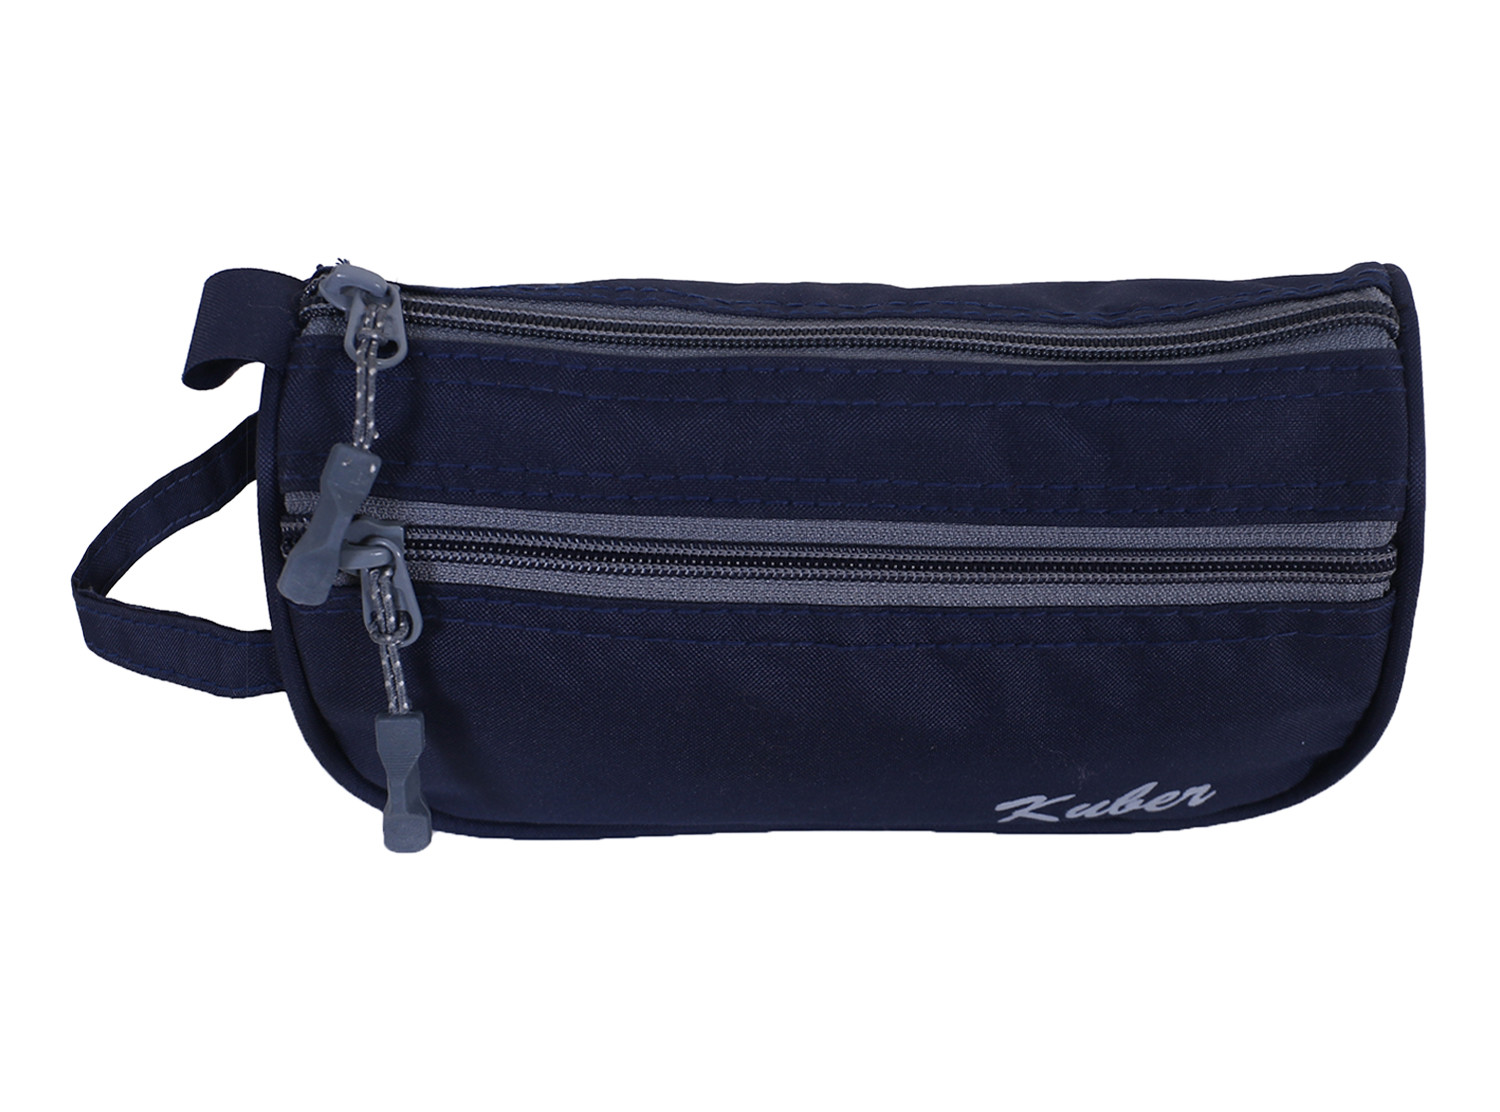 Kuber Industries Rexine Toiletry Organizer|Portable & Durable Travel Shaving Doop Kit With Fornt Zipper And Carrying Strip (Navy Blue)